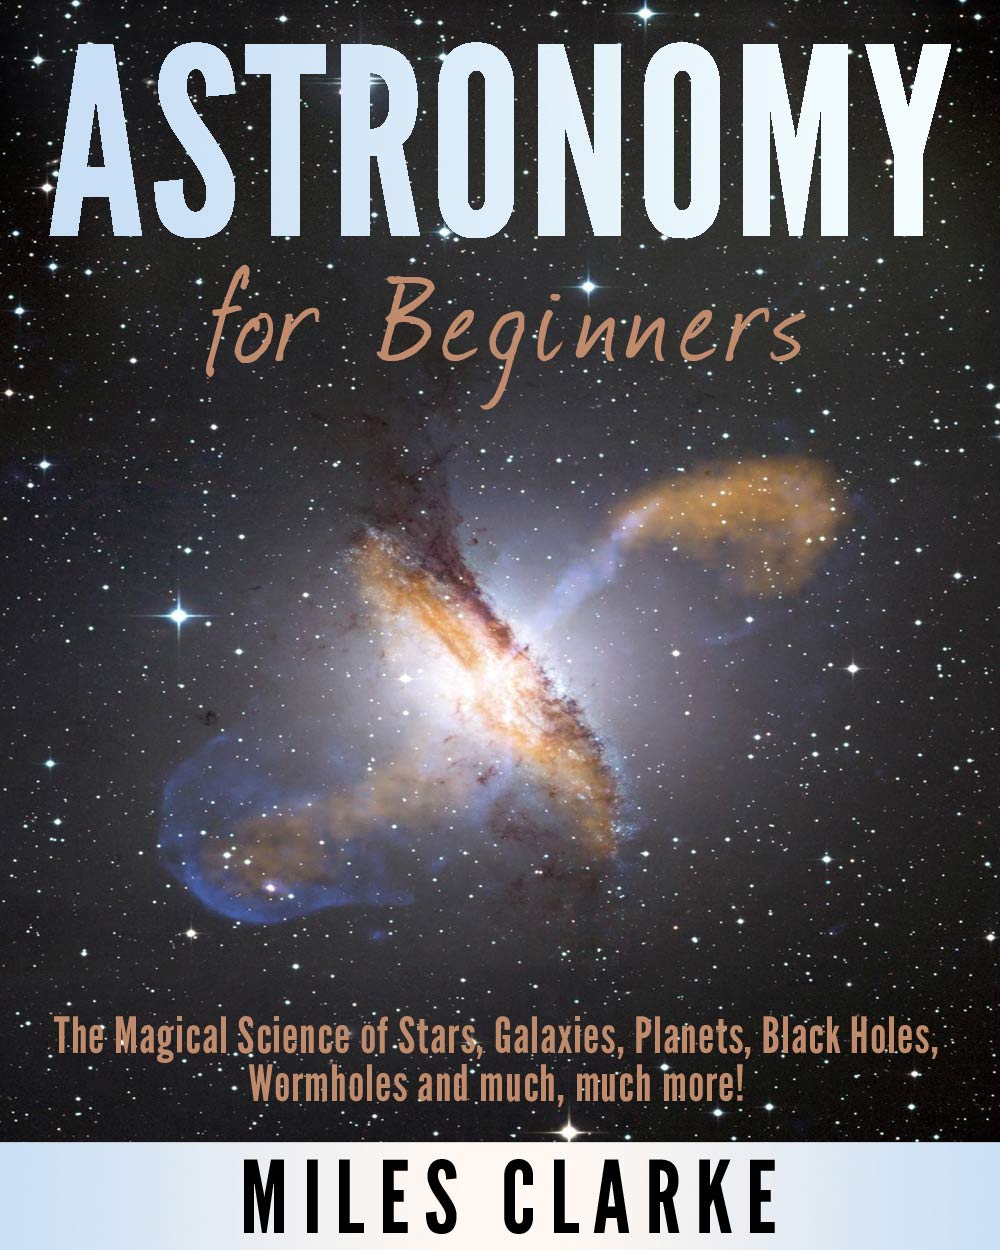 FREE: Astronomy: Astronomy for Beginners: The Magical Science of Stars, Galaxies, Planets, Black Holes, Wormholes and much, much more! by Miles Clarke